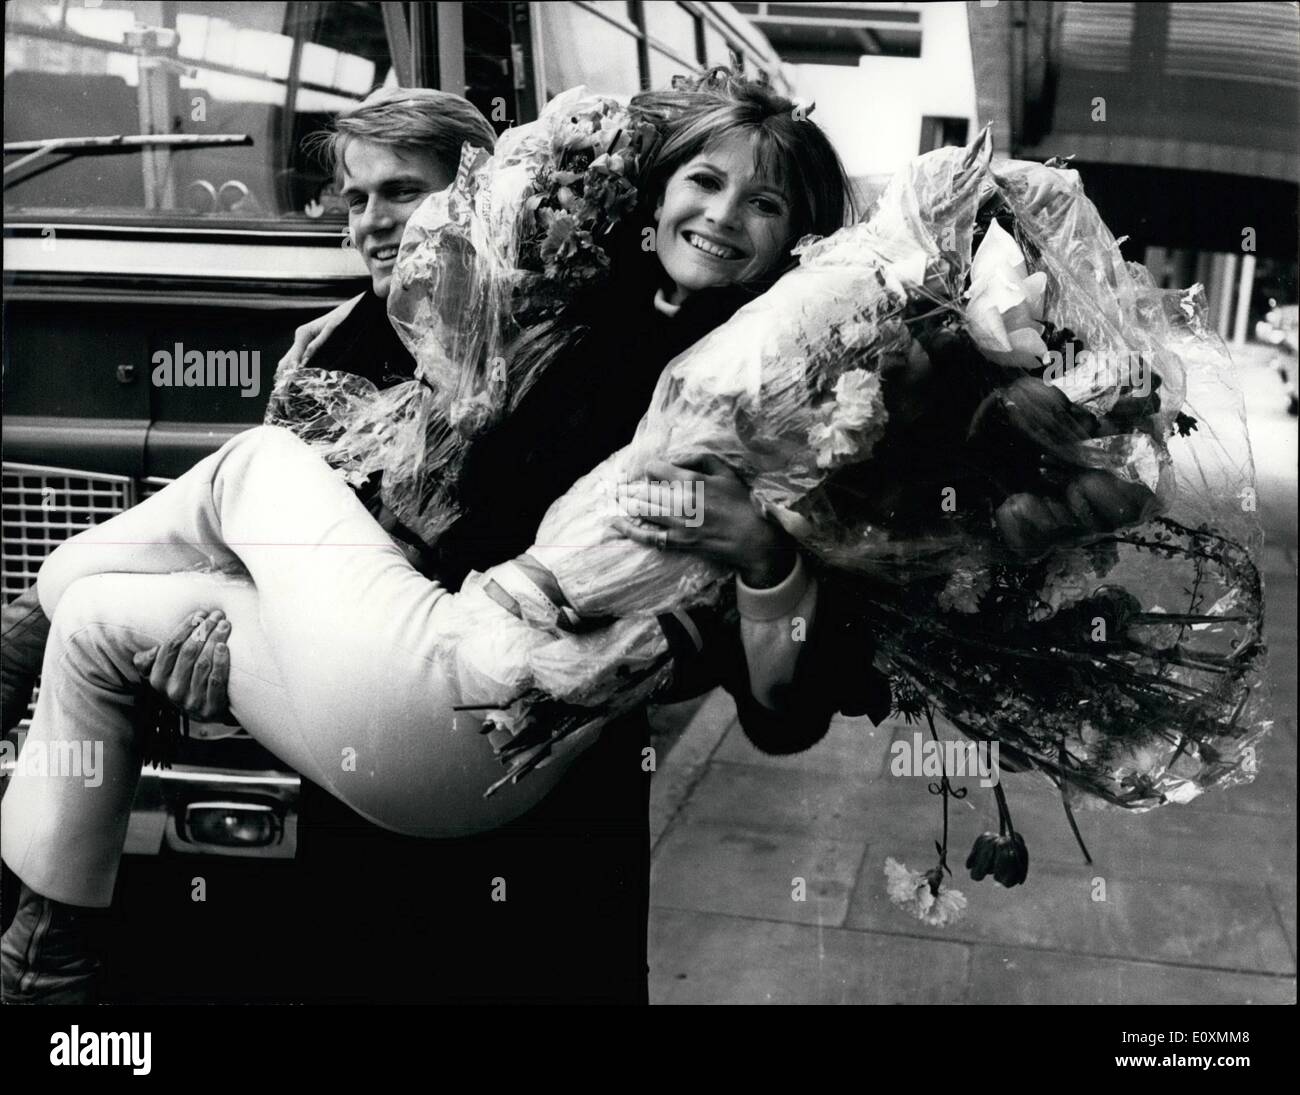 Apr. 04, 1967 - Sandie Shaw returns from triumph in the Eurovision song contest.: Sandie Shaw arrived at London Airport yesterday after her triumph in the Eurovision Song Contest, at which she sang British's entry ''Puppet on a String''. Britain won by the widest margin every with 47 votes to Ireland's 22 and France's 20. The contest was held in Vienna. Photo shows Sandie Shaw is swept off her fact by singer Adam Faith, who returned with her from Vienna yesterday at London airport. Stock Photo